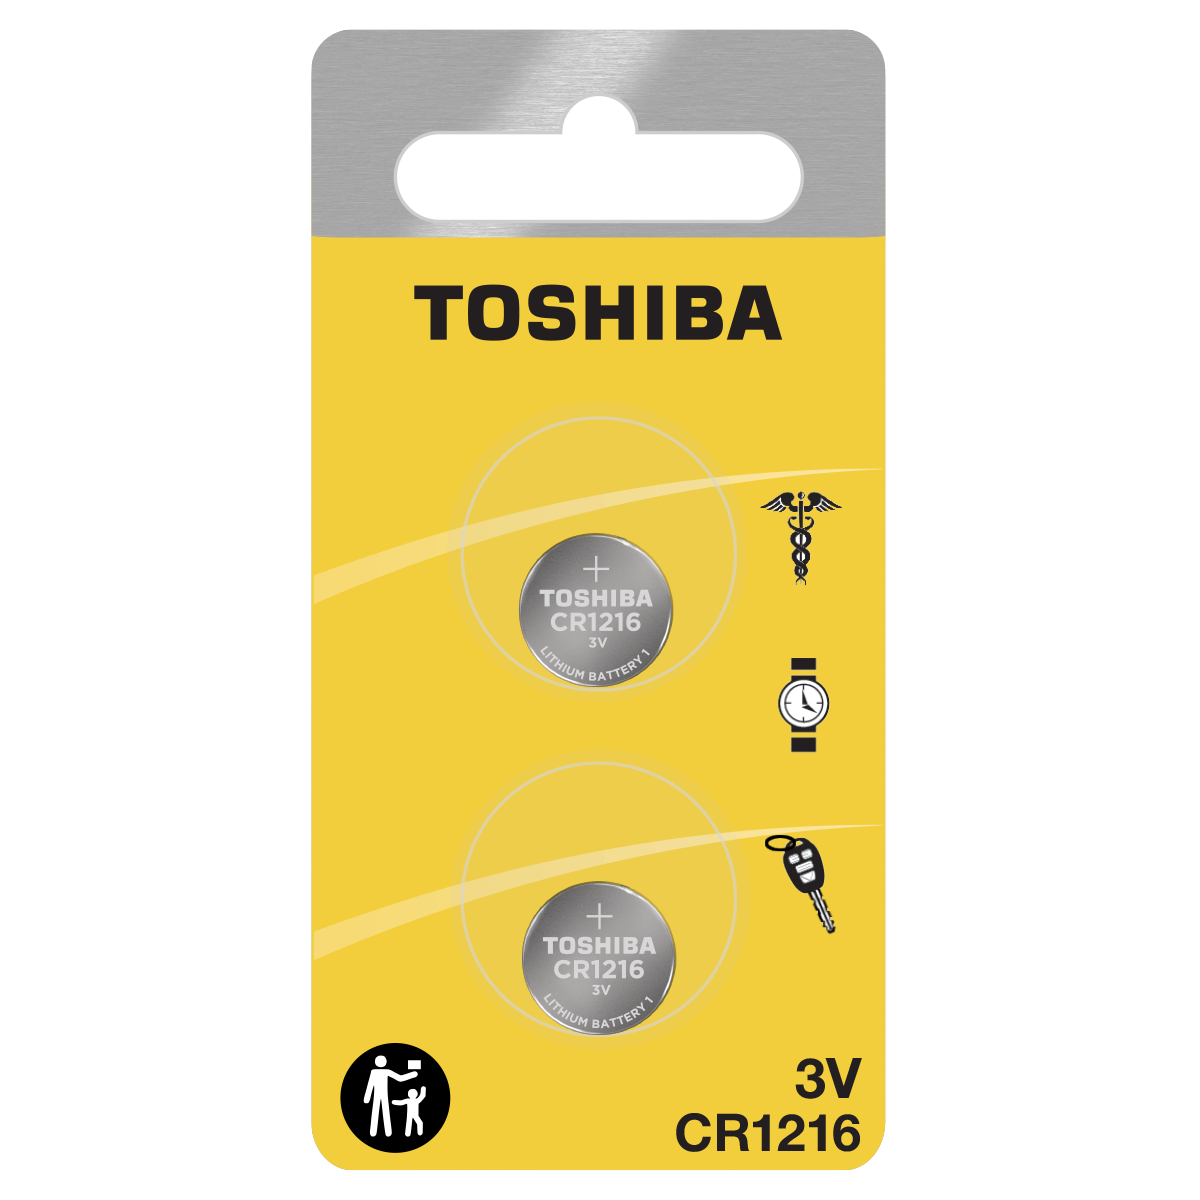 Toshiba CR1216 Battery 3V Lithium Coin Cell (2 PCS Child Resistant Blister Package)